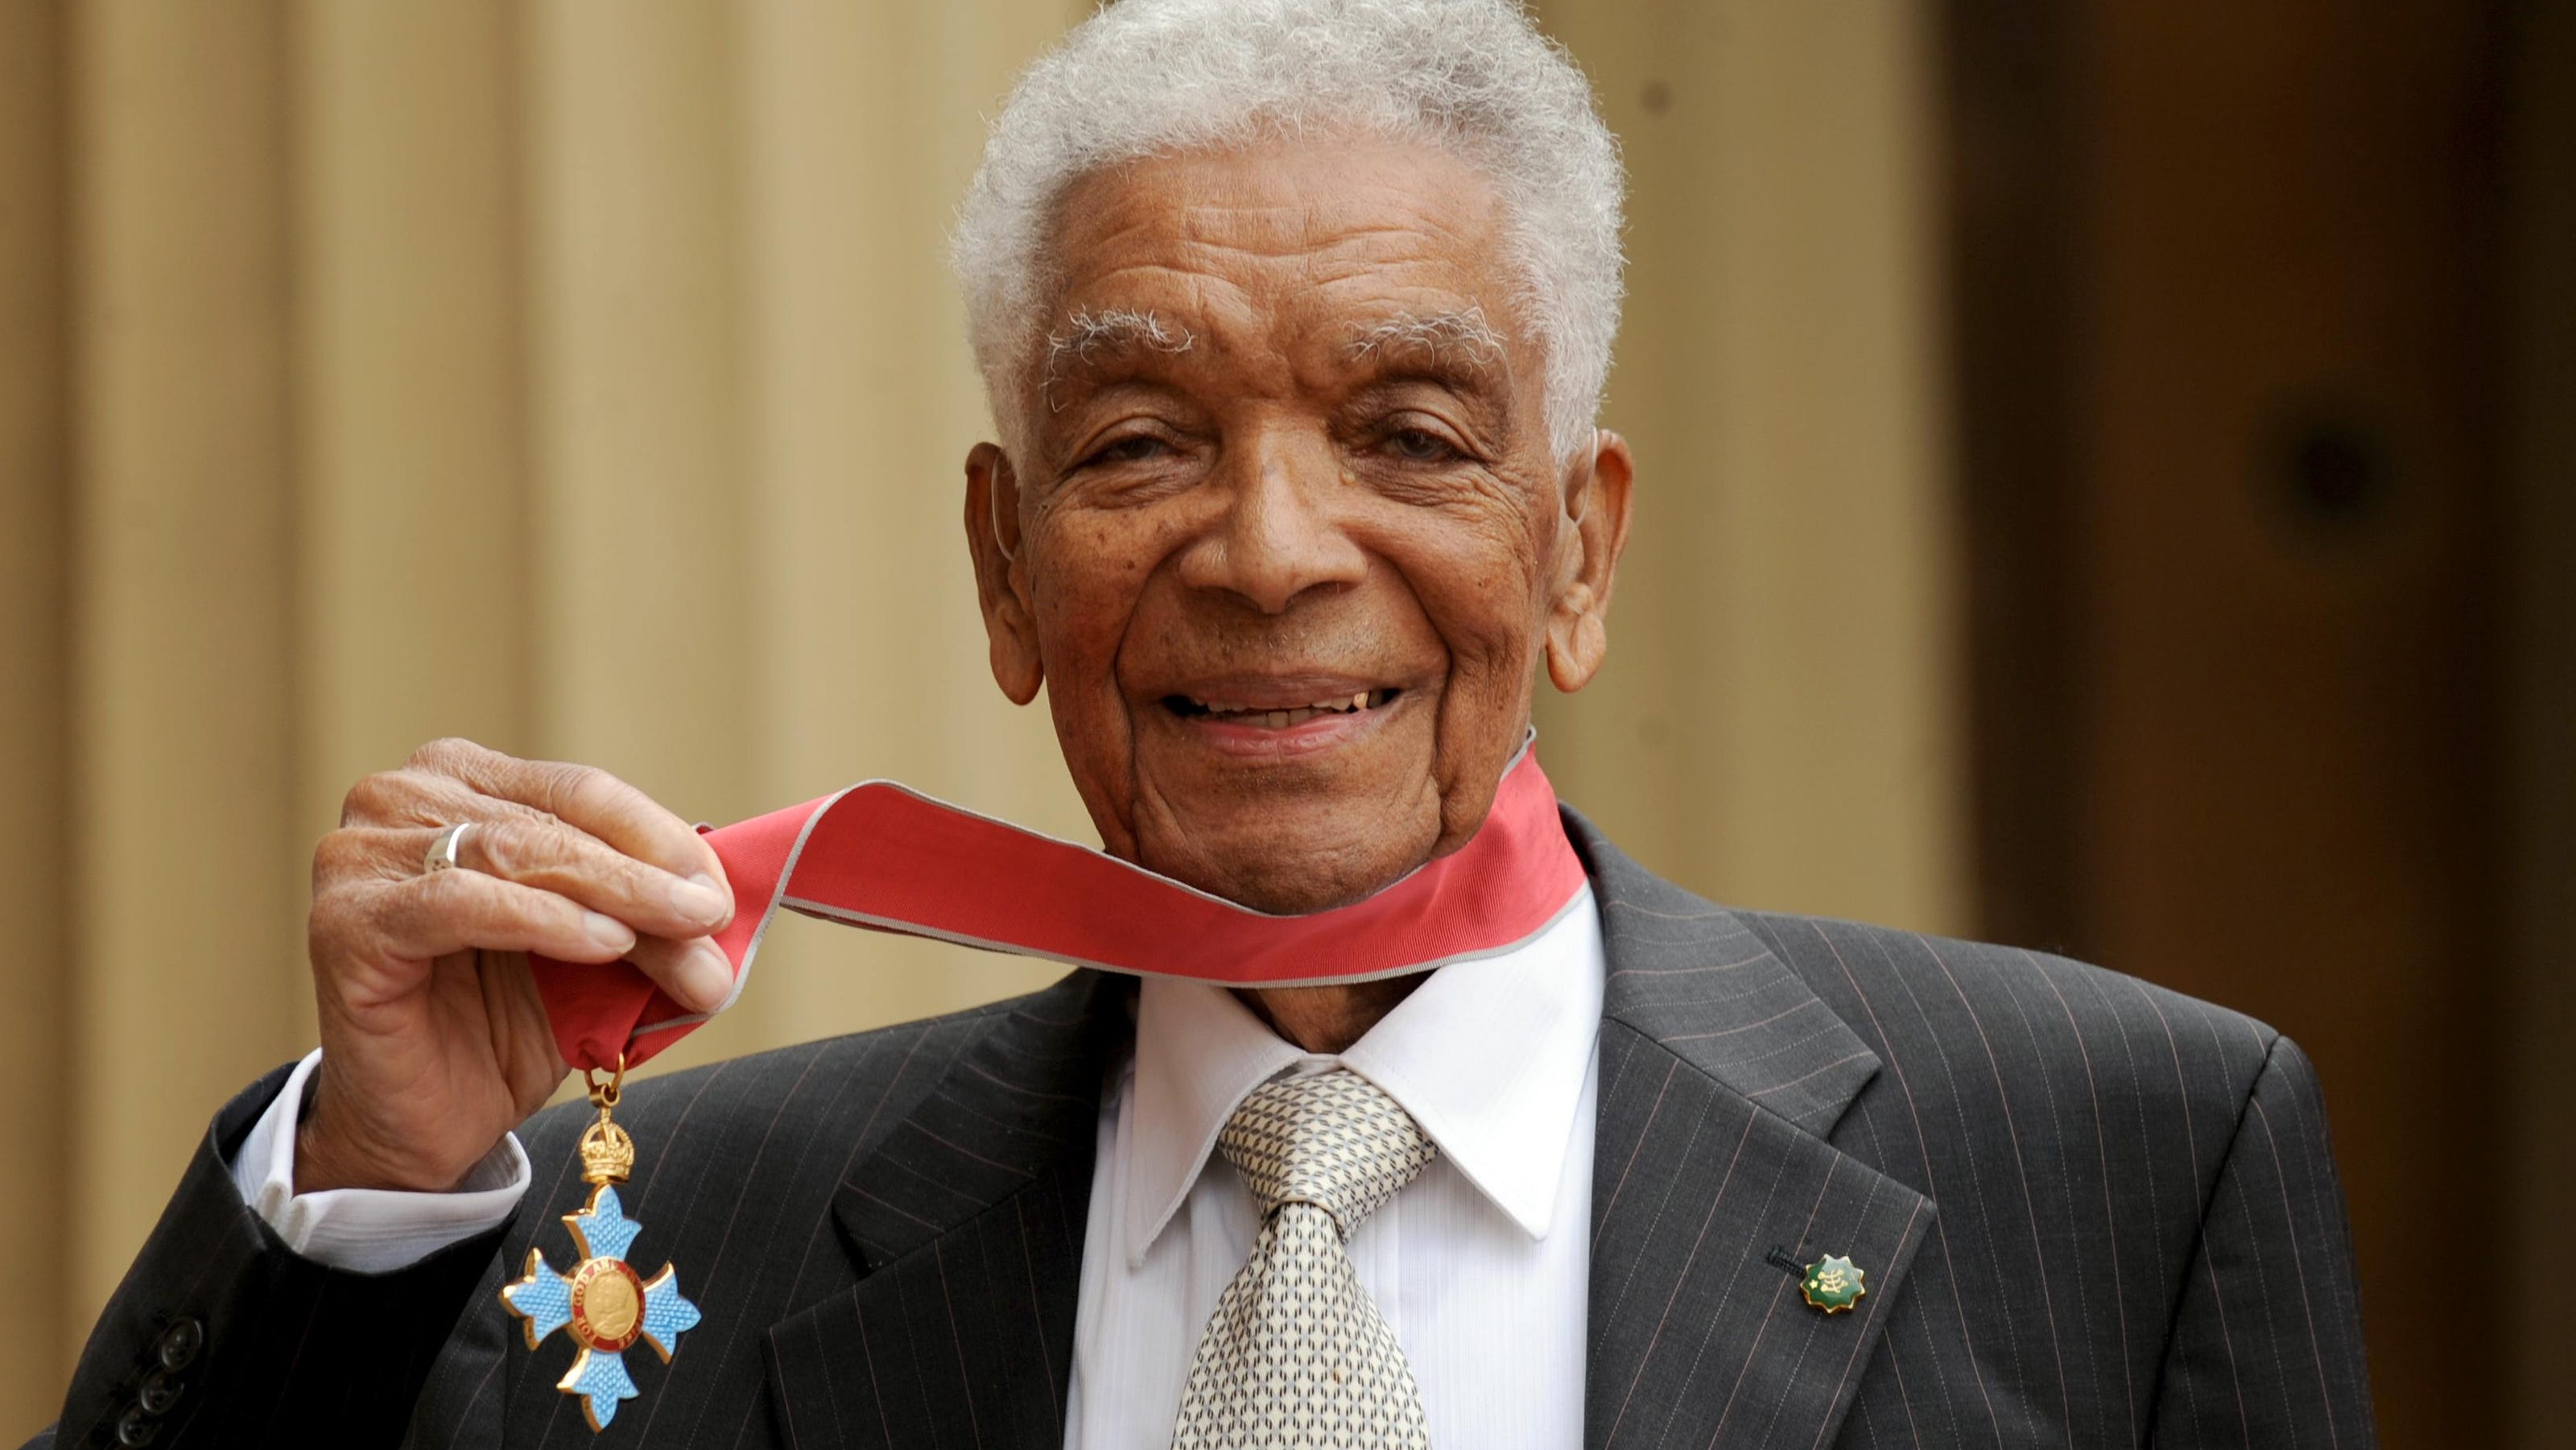 Earl Cameron, pioneering James Bond and 'Doctor Who' actor, dies at 102 - USA TODAY